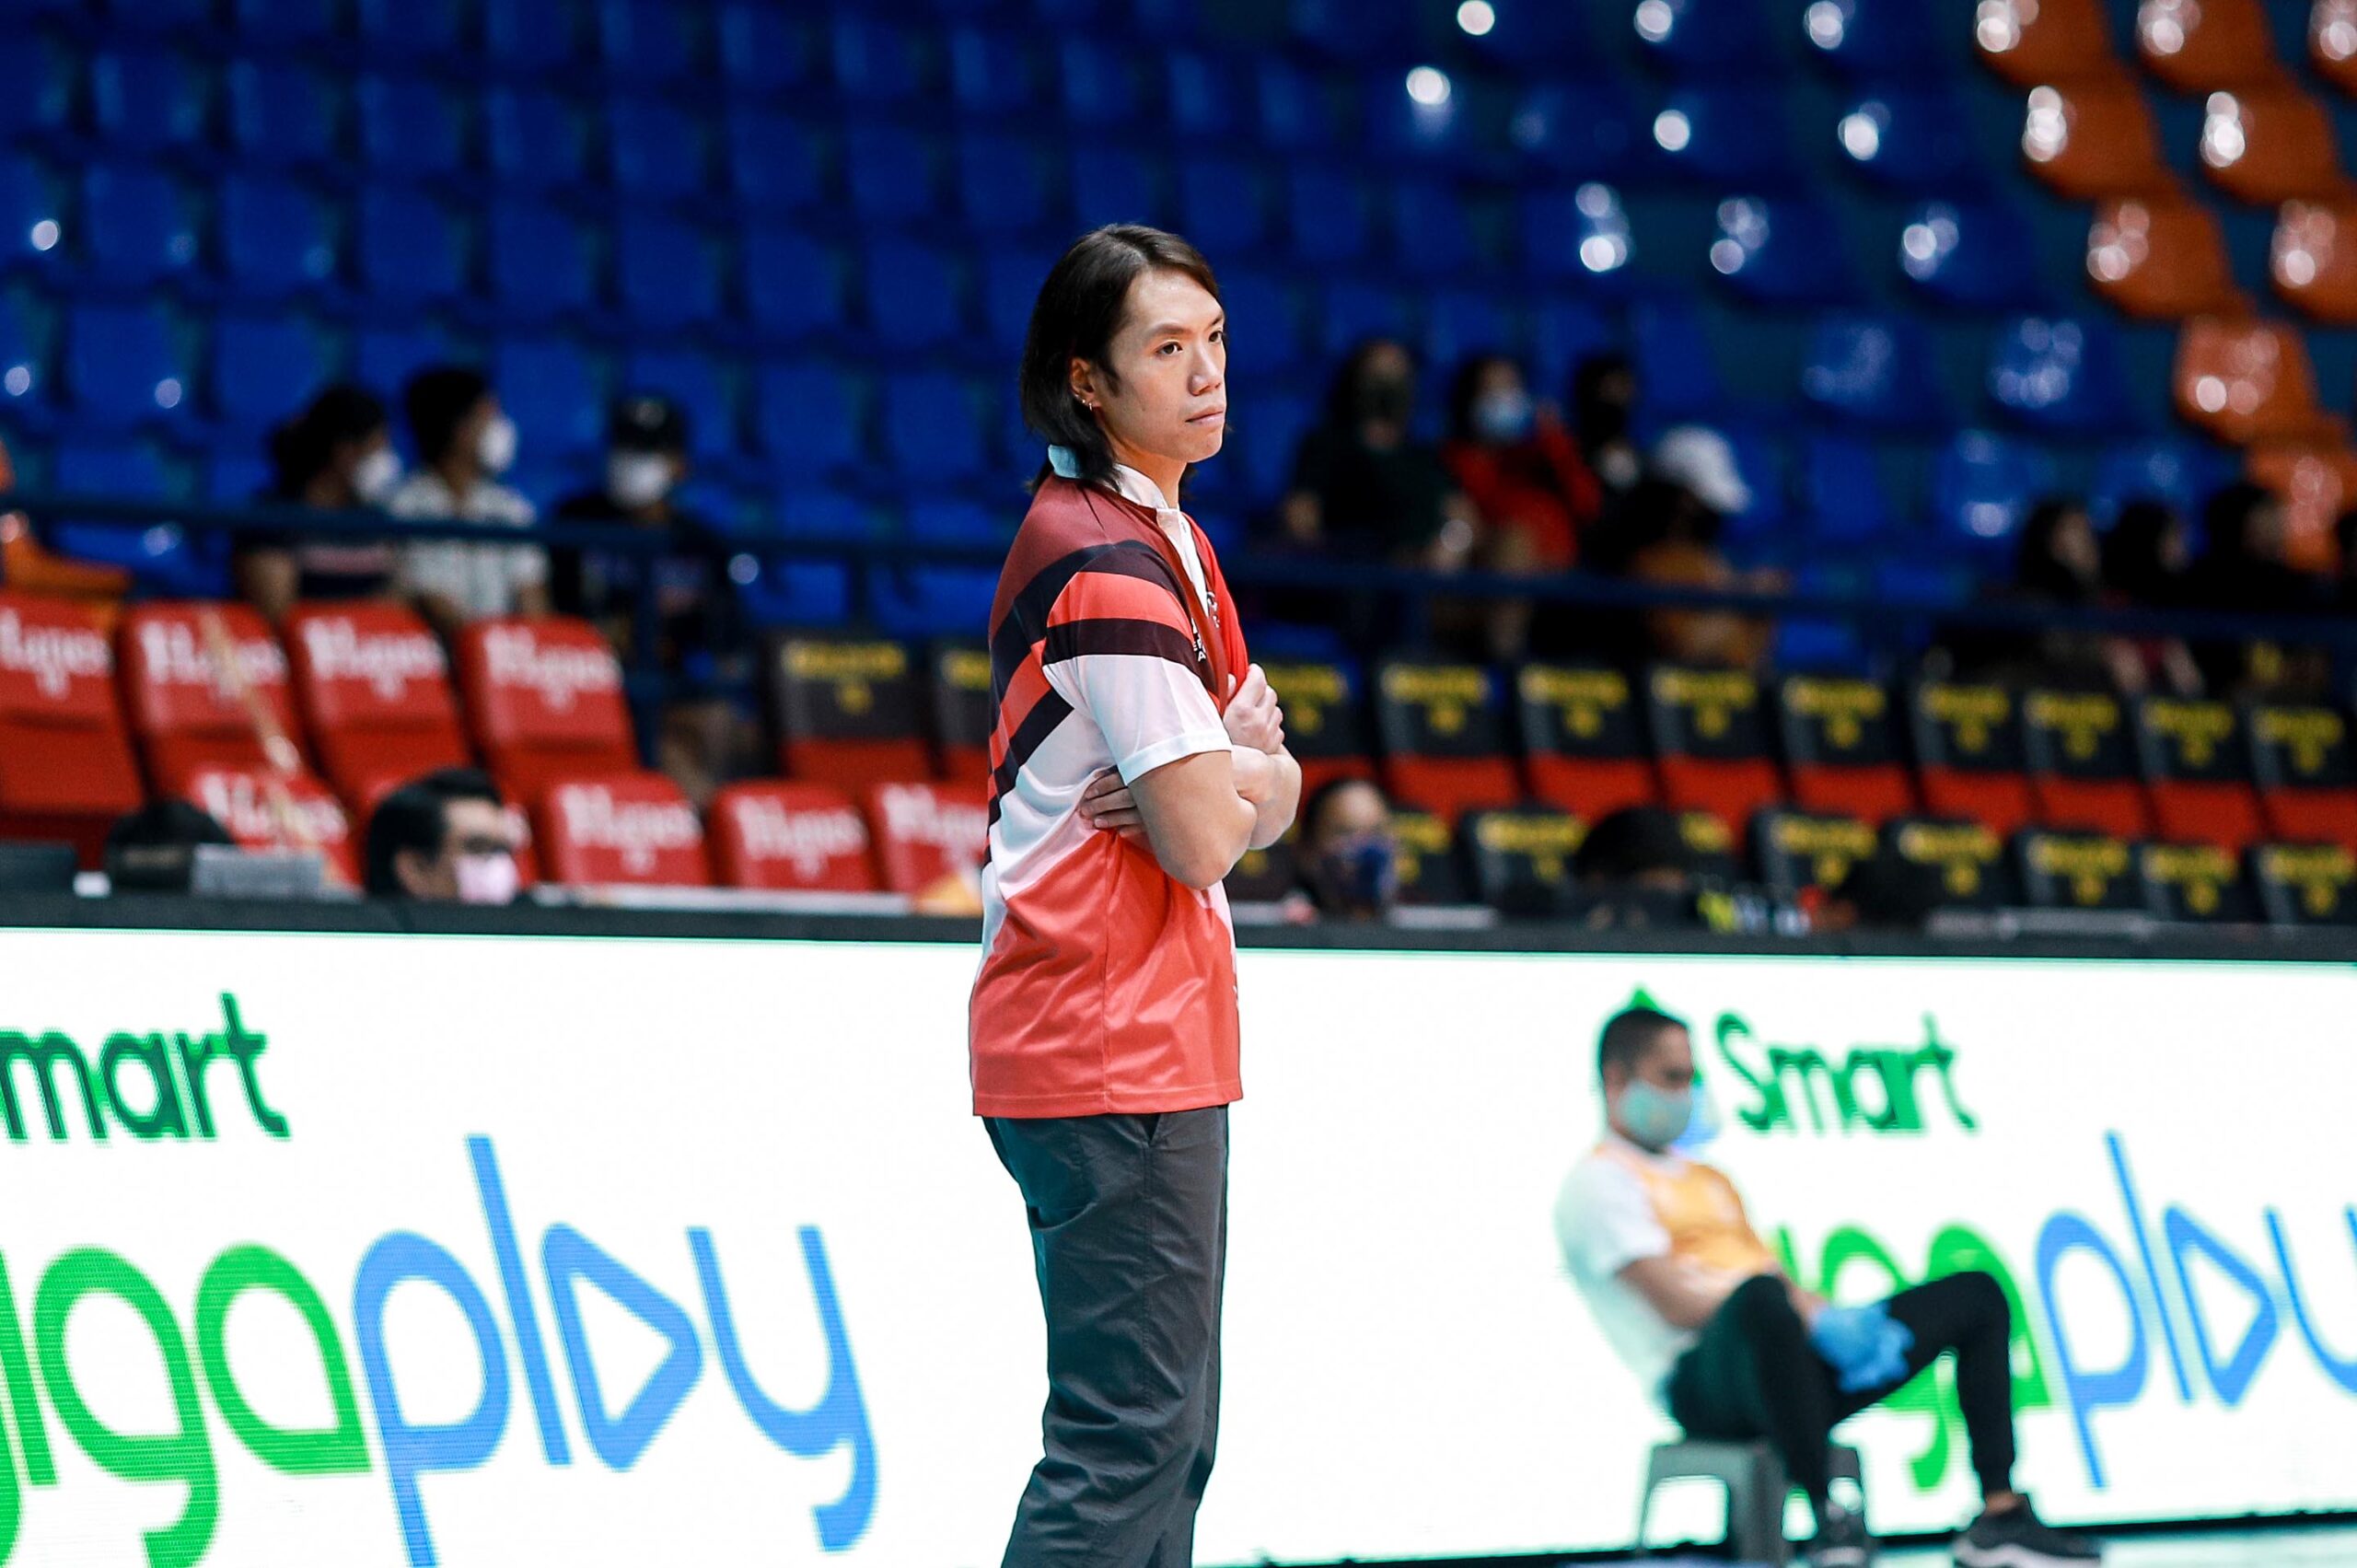 2022-PVL-Chery-vs-Balipure-aaron-velez-scaled Chery Tiggo looks to 'reconnect' after heartbreaking end to title defense News PVL Volleyball  - philippine sports news